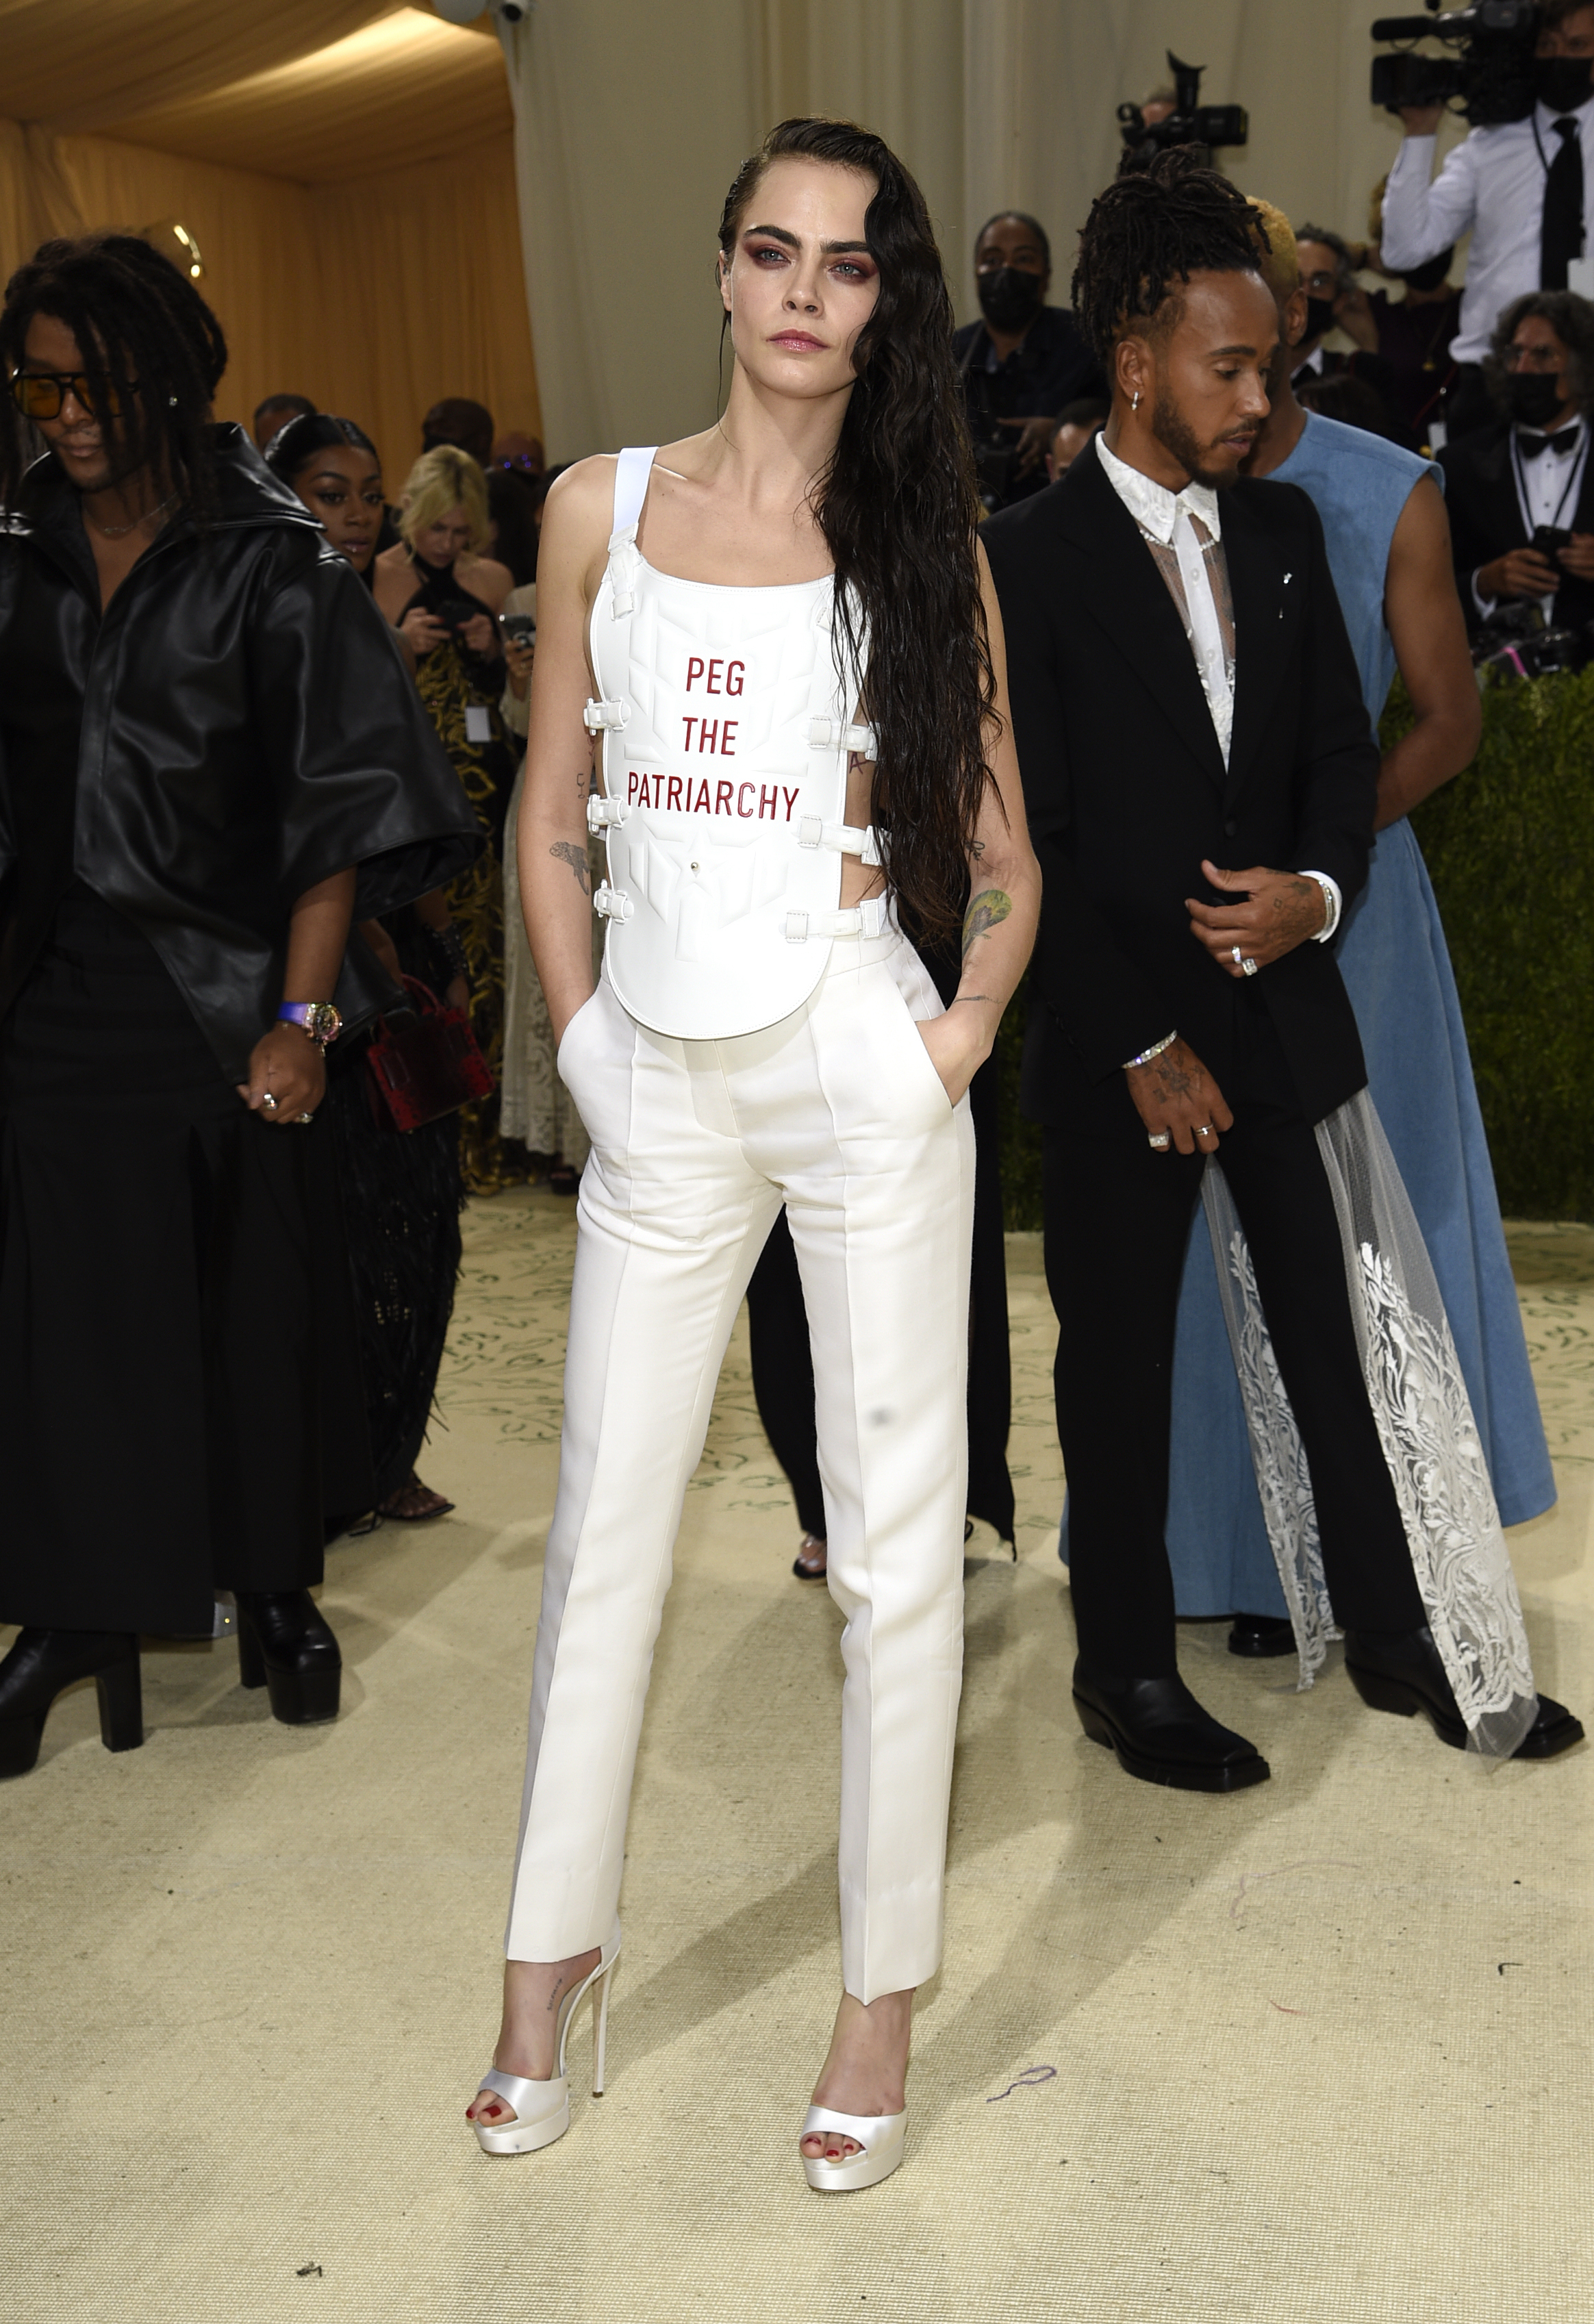 Cara Delevingne wears a white jumpsuit that says "peg the patriarchy" in red letters.